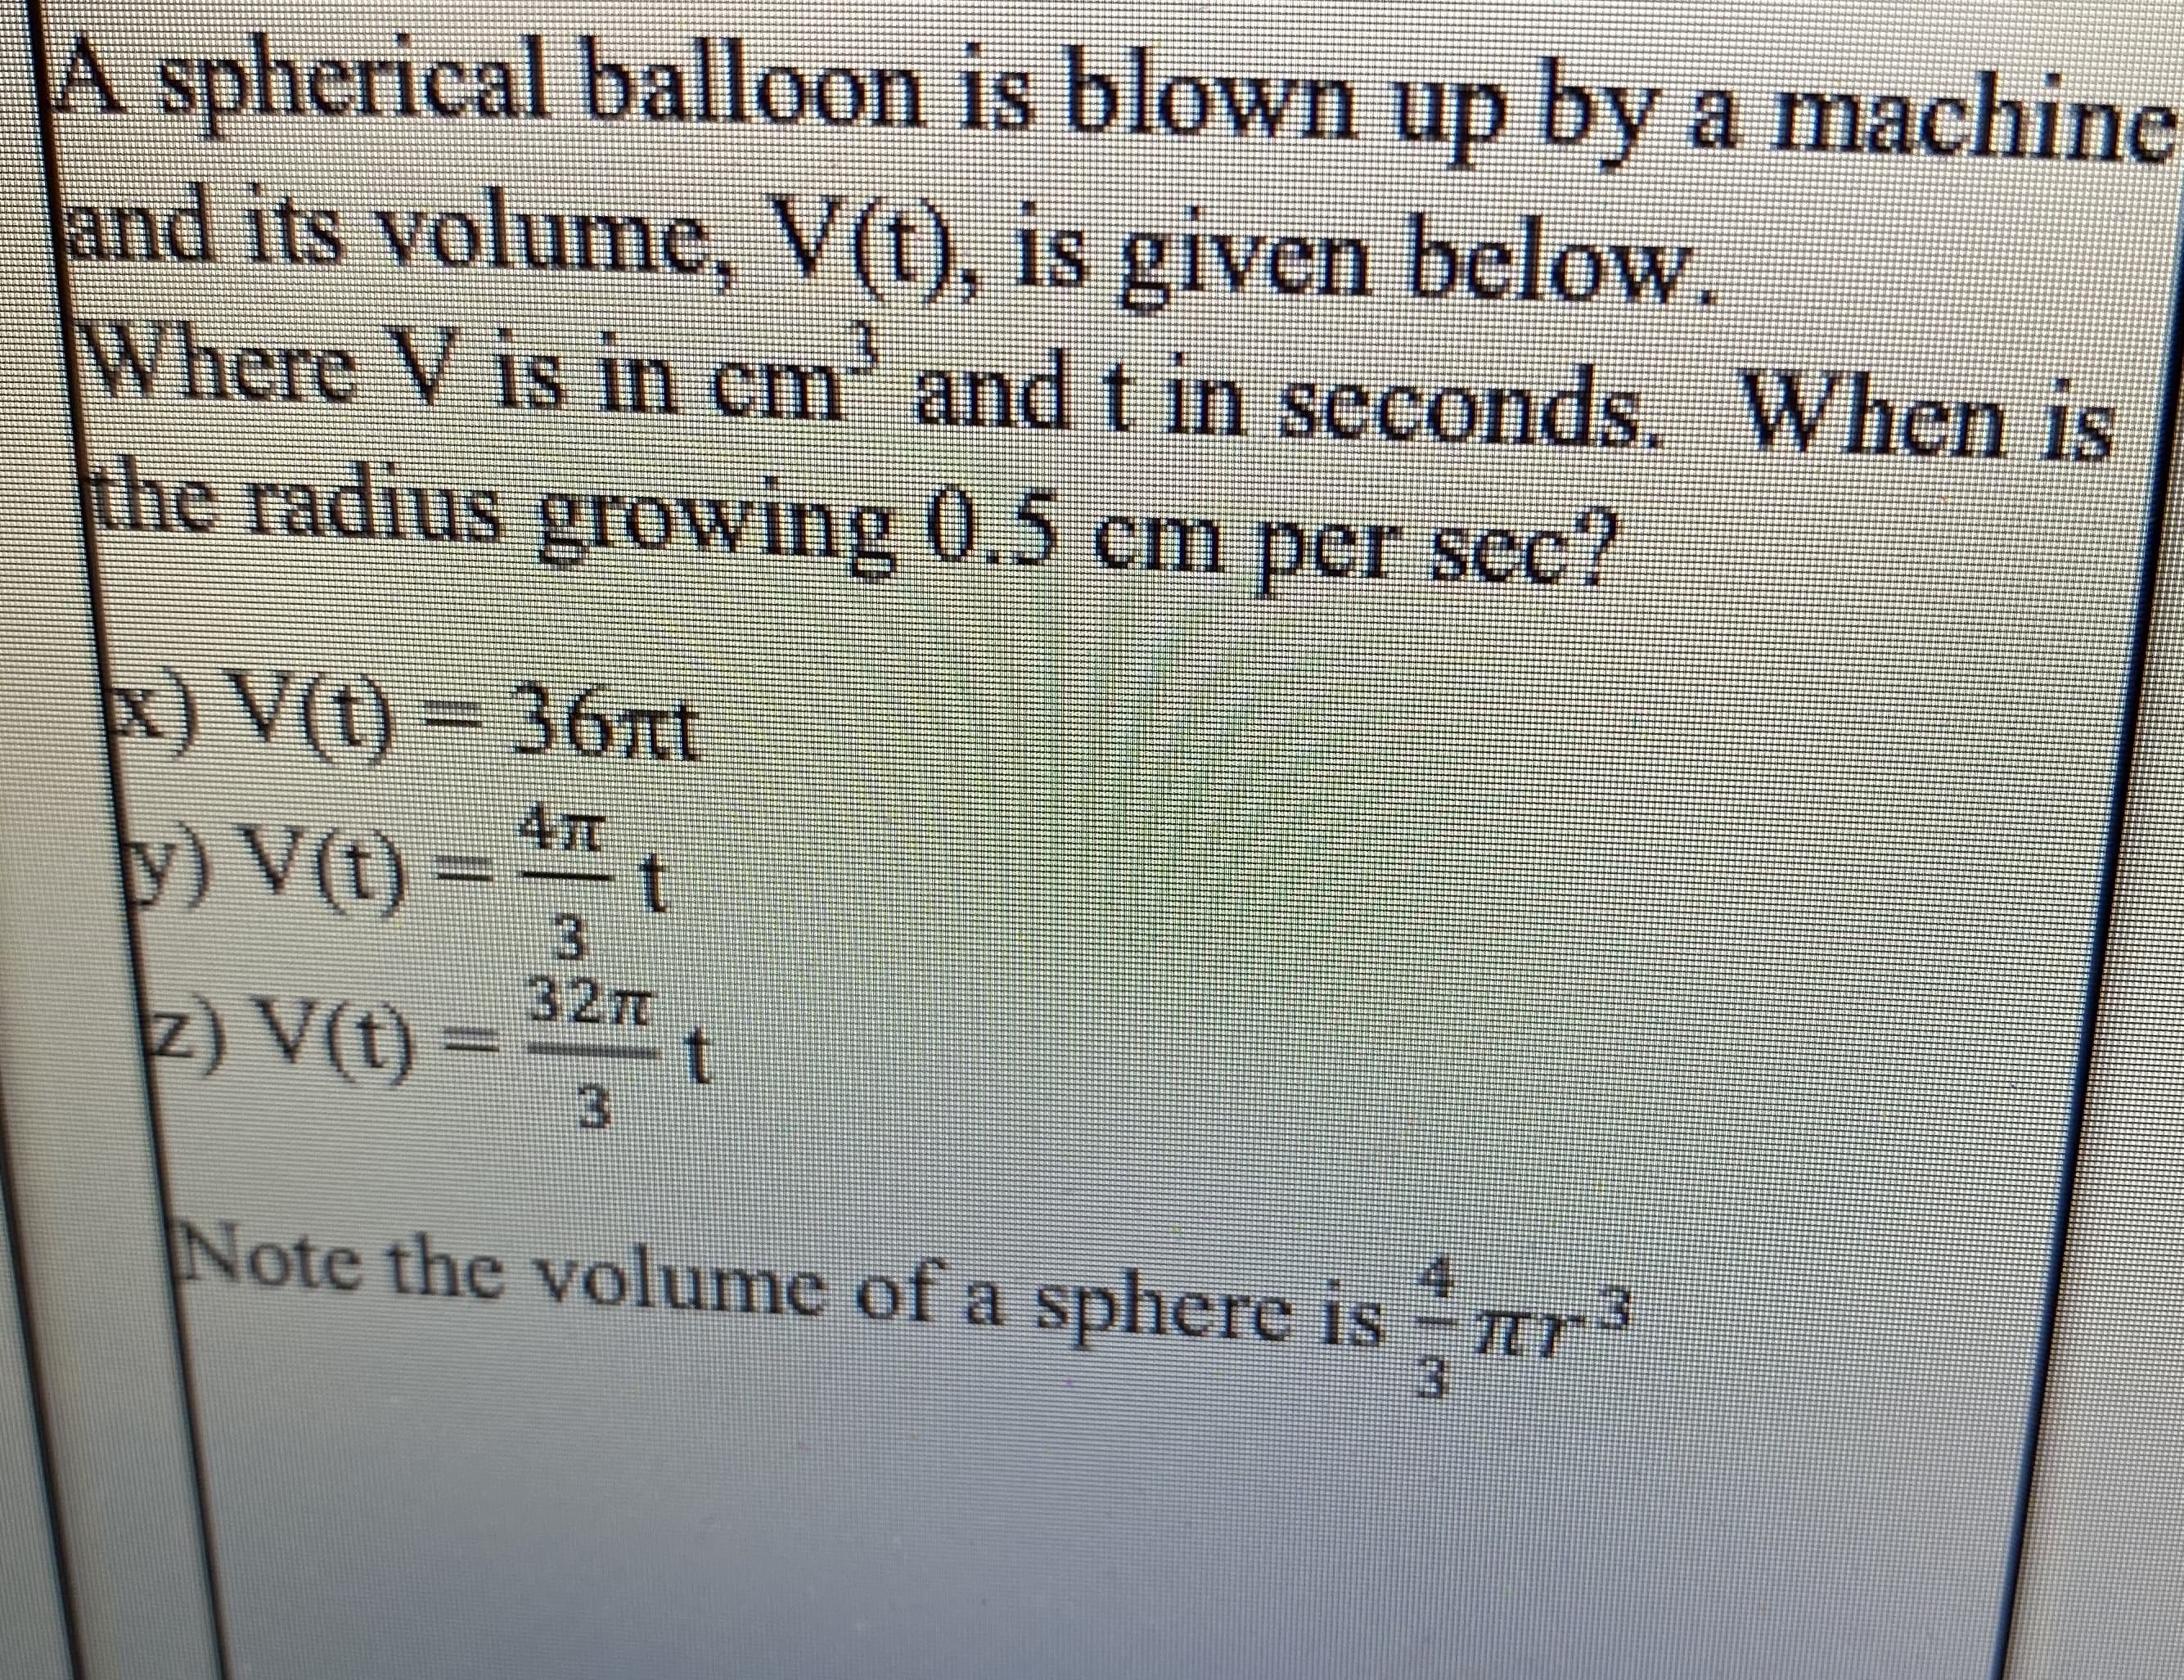 A spherical balloon is blown up by a machine
and its volume, V(t), is given below,
